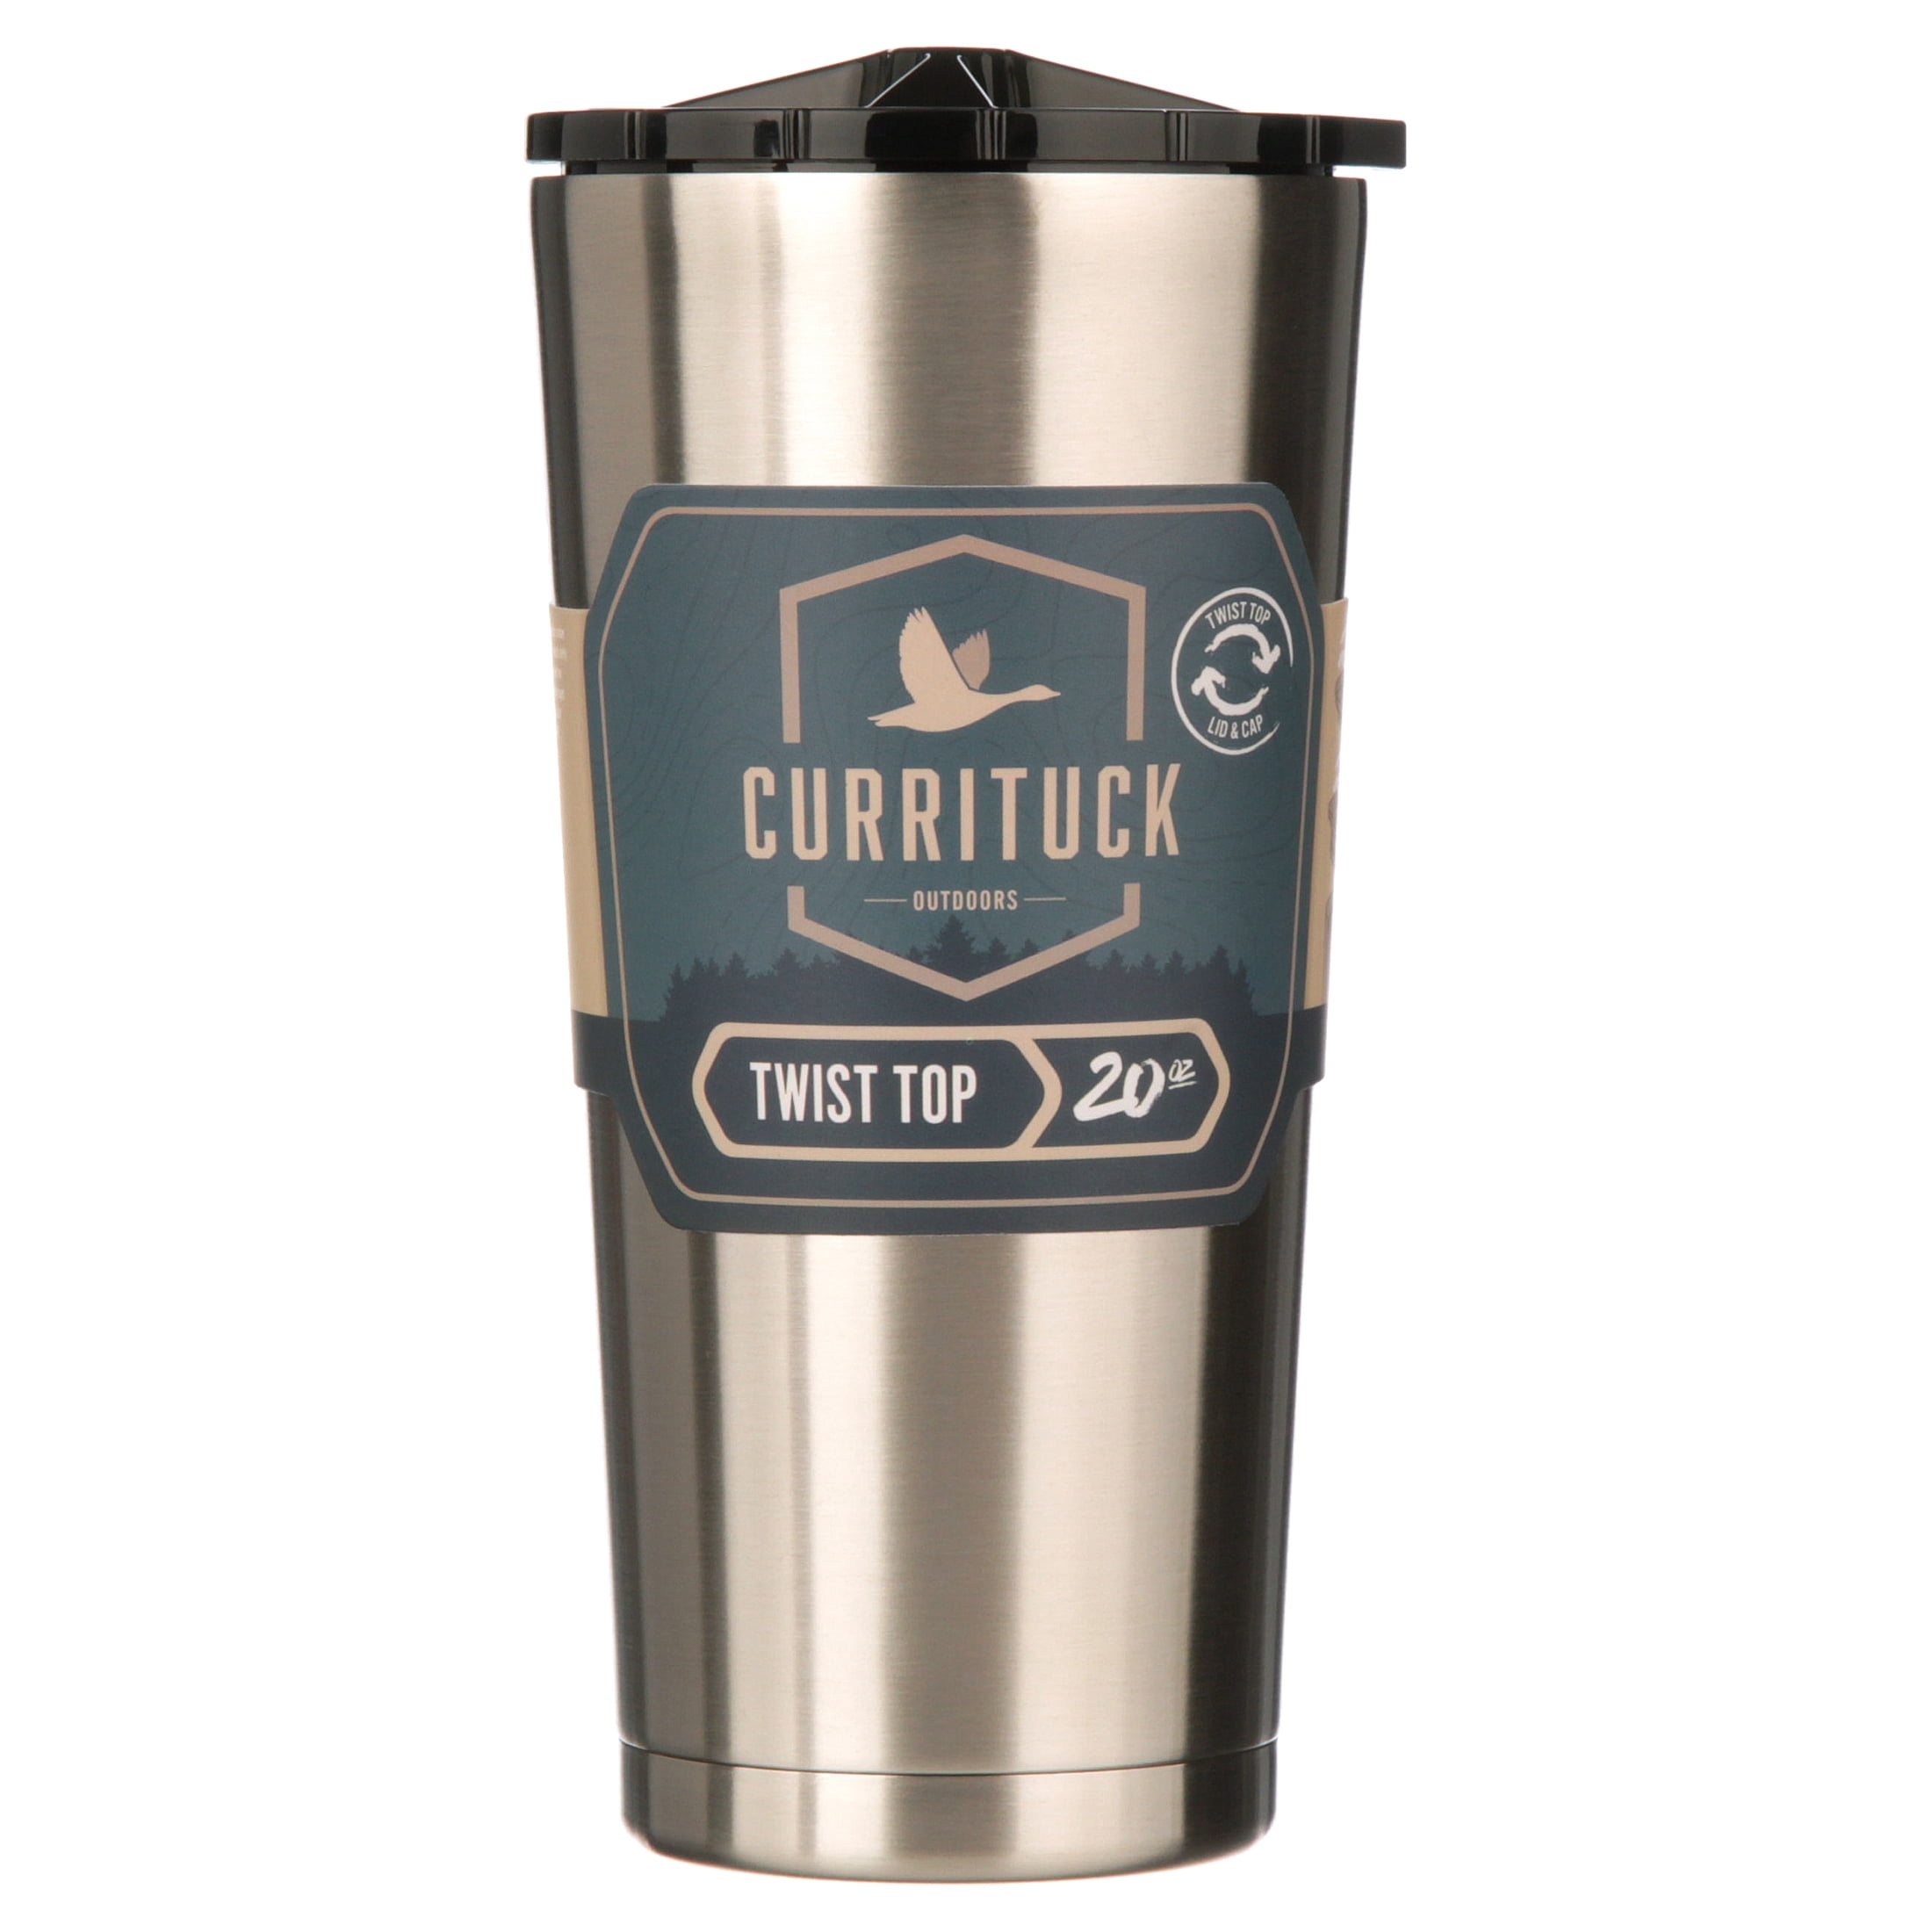 Coral Pink Won't Sweat Tumbler with Double Wall Insulation 53061 Great For Hot and Cold Drinks Leak Proof Lid Camco Life is Better at The Campsite Stainless Steel 20 oz 